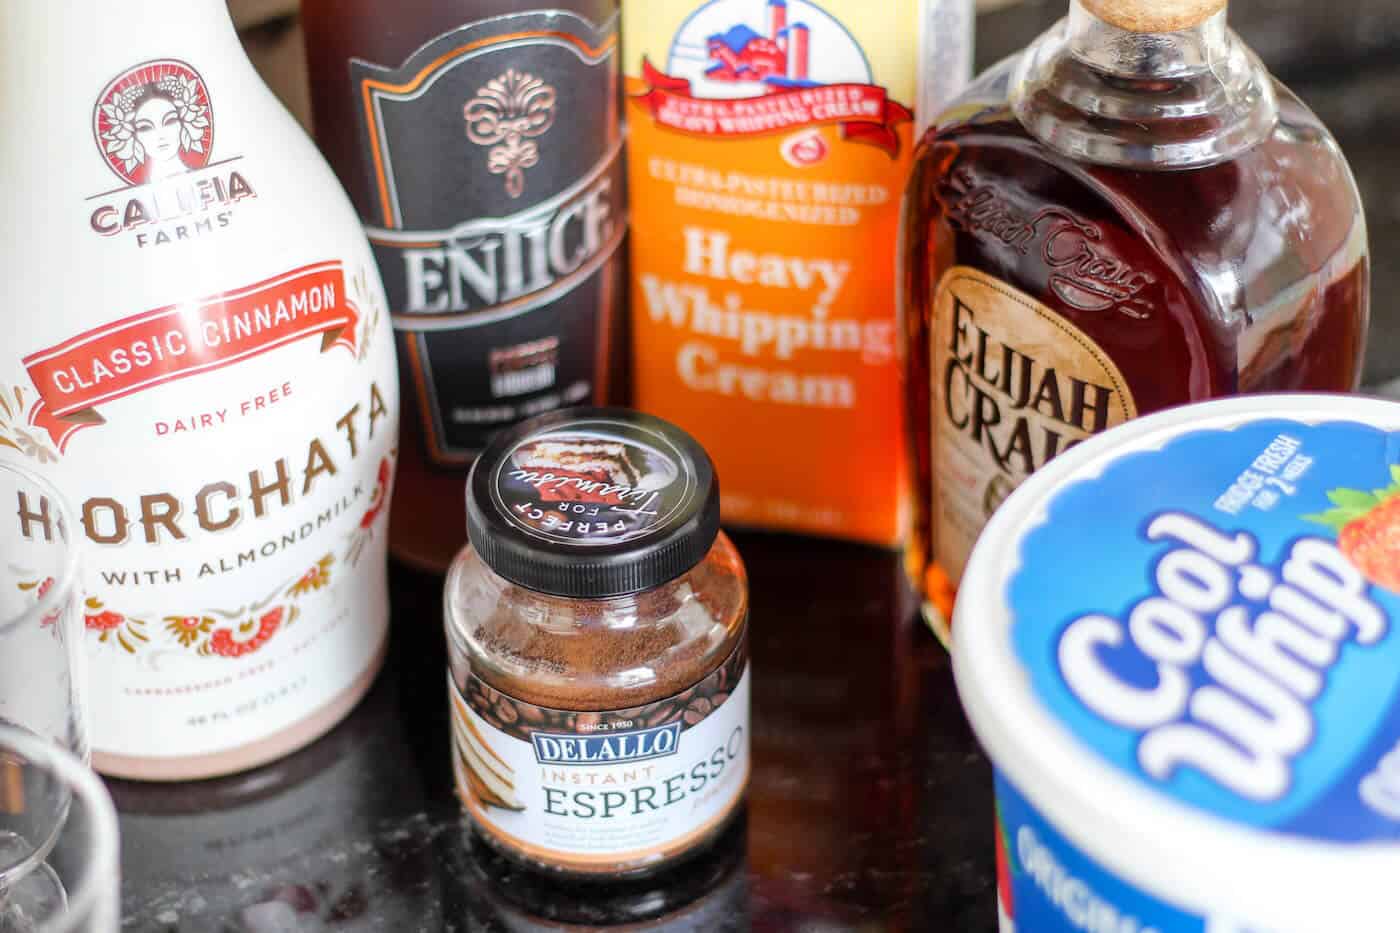 Califia Farms Horchata, heavy whipping cream, Elijah Craven bourbon, spices, and cool whip